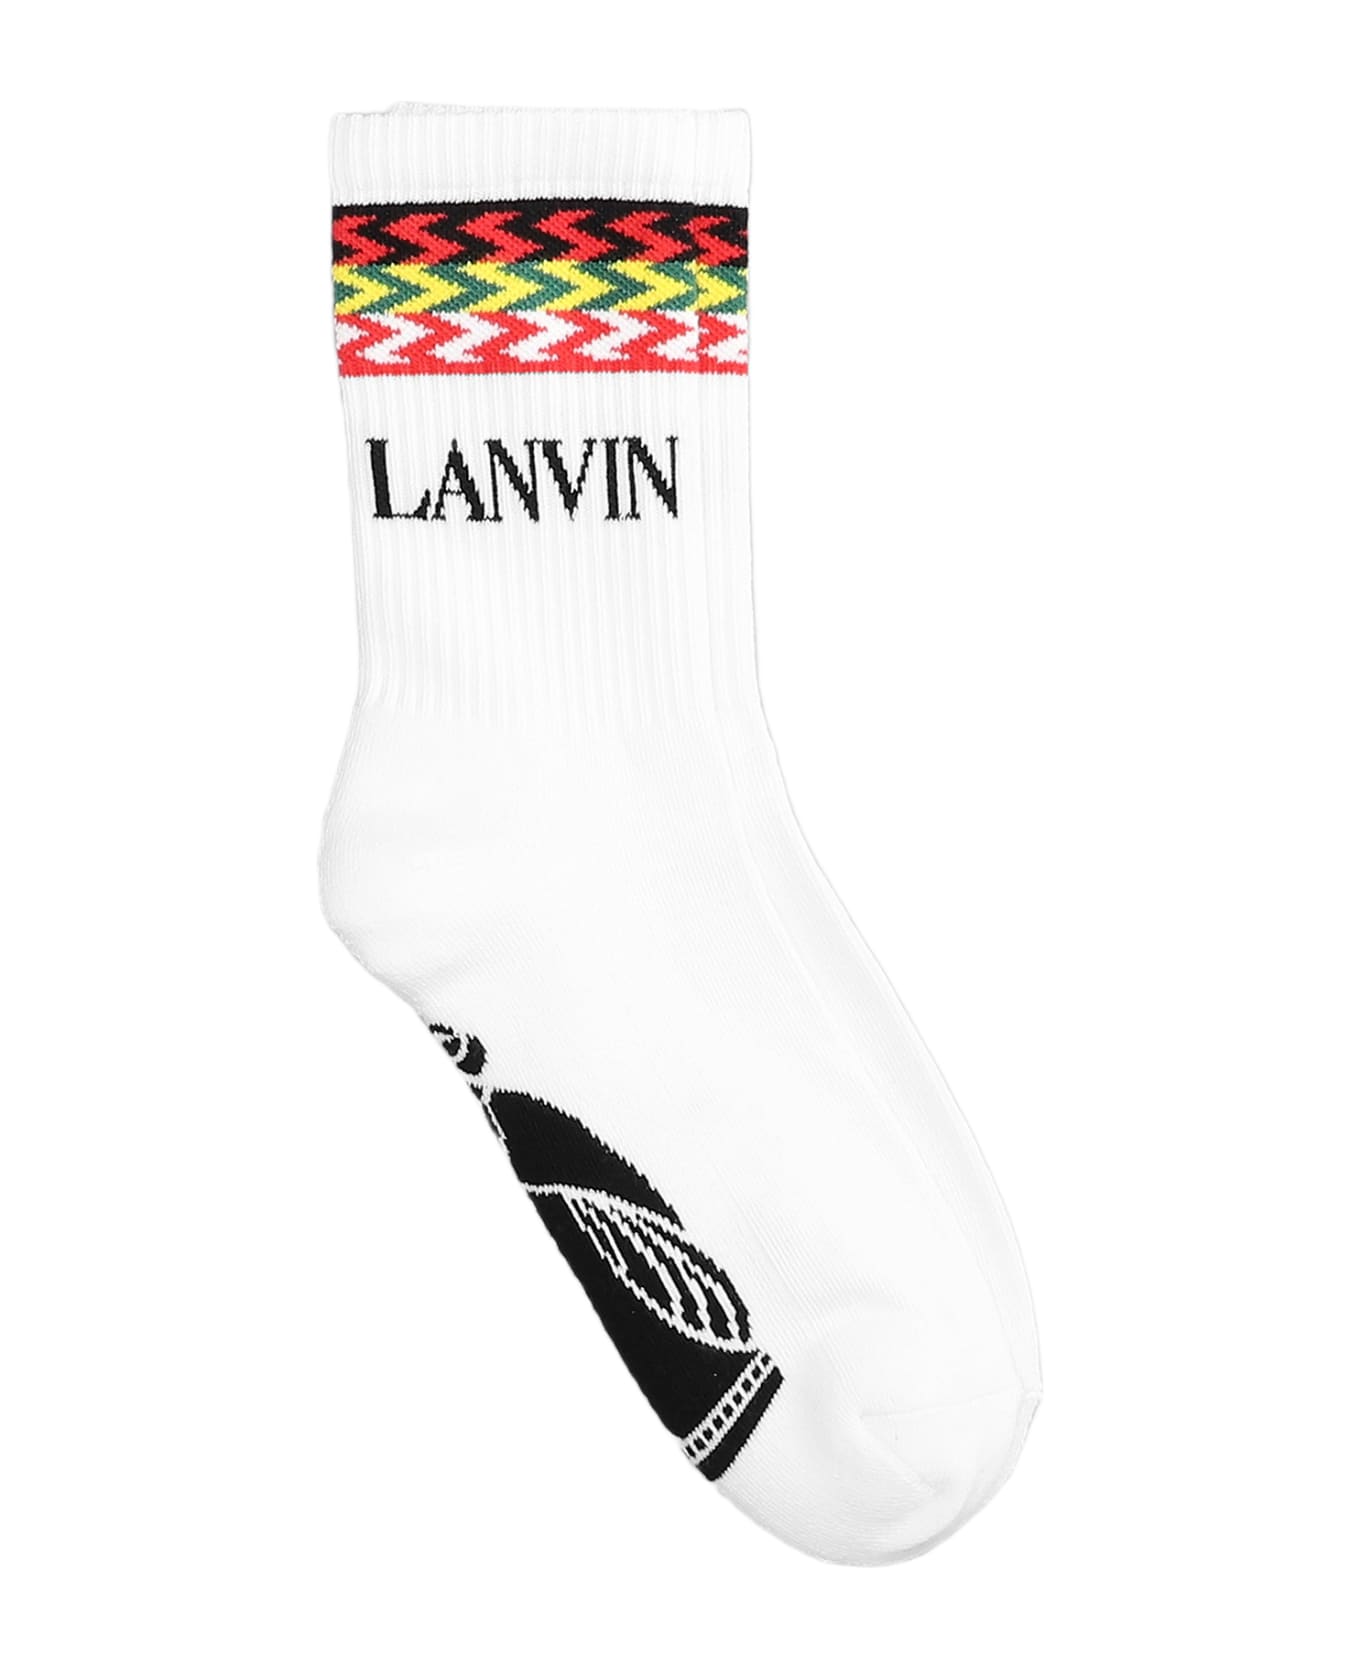 Lanvin Socks In Black And White Cotton - black and white 靴下